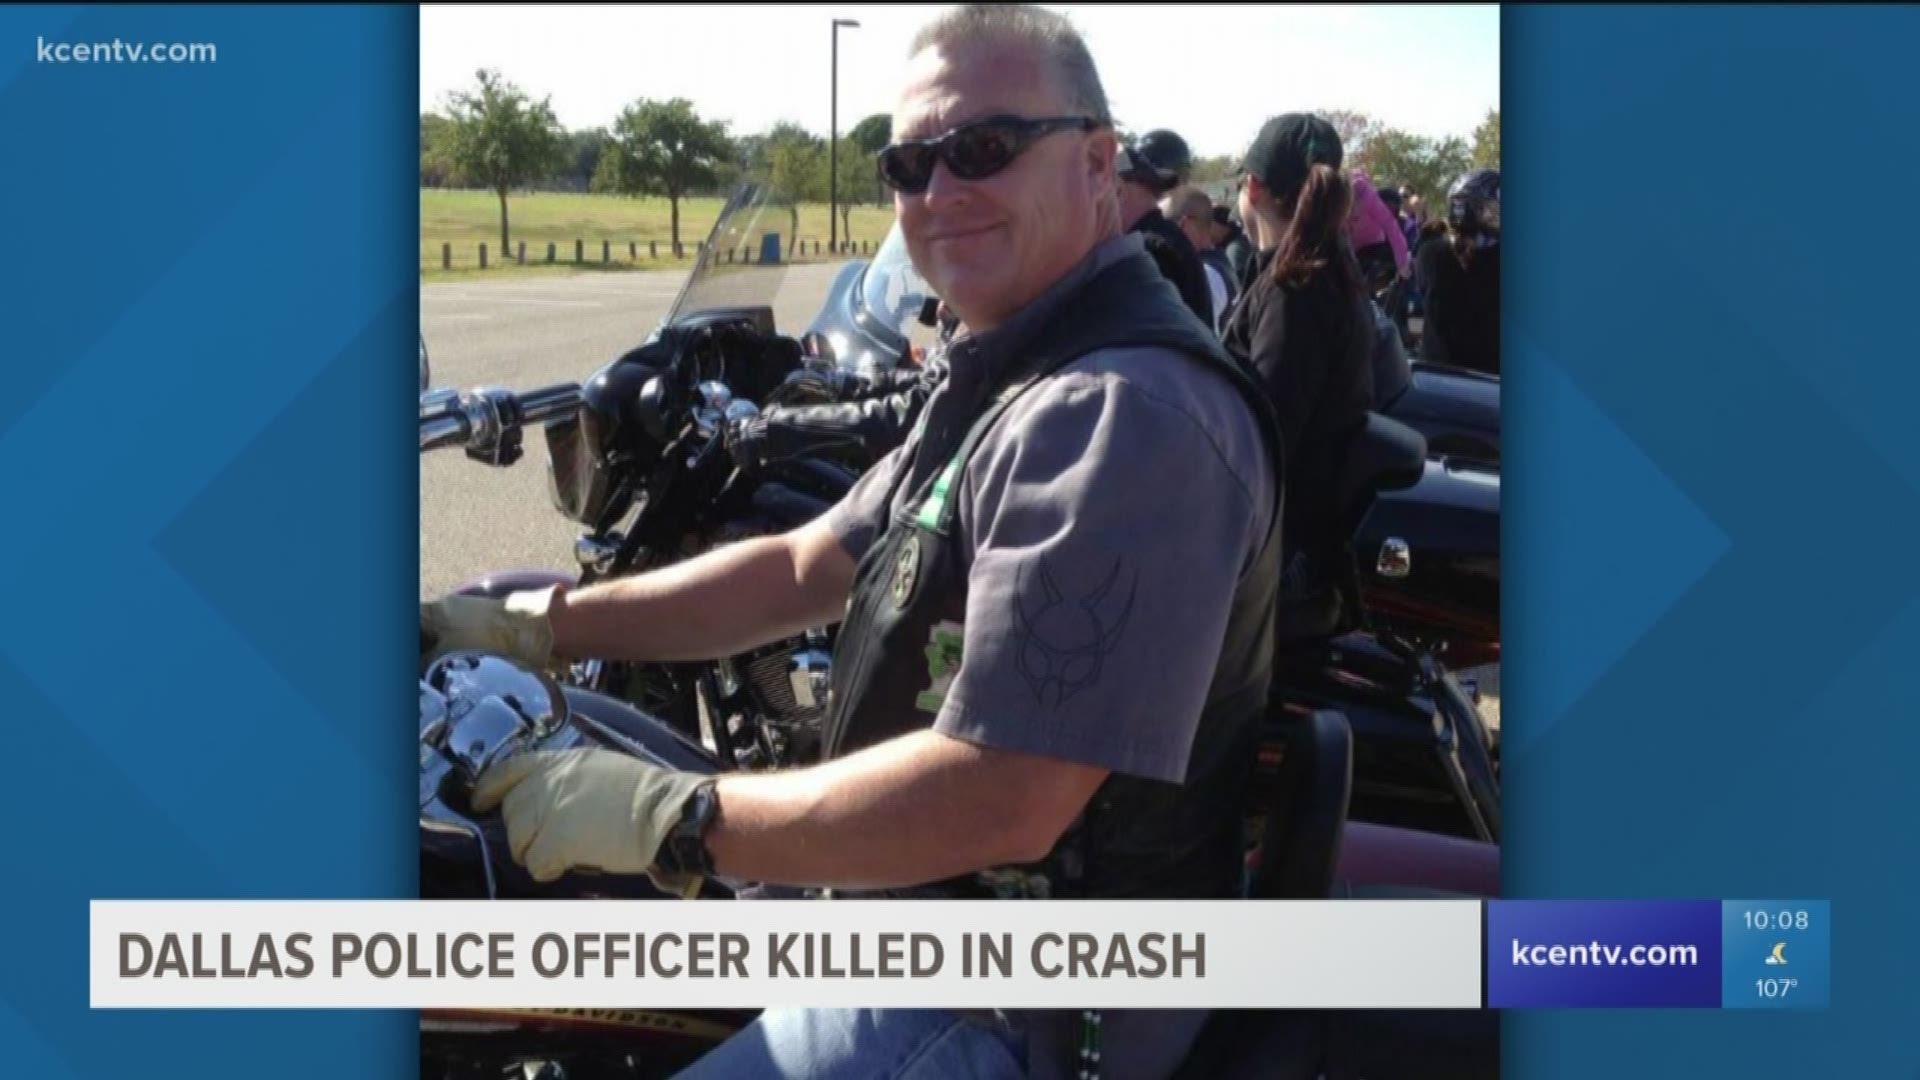 The officer was blocking traffic when he was hit by a suspected drunk driver.